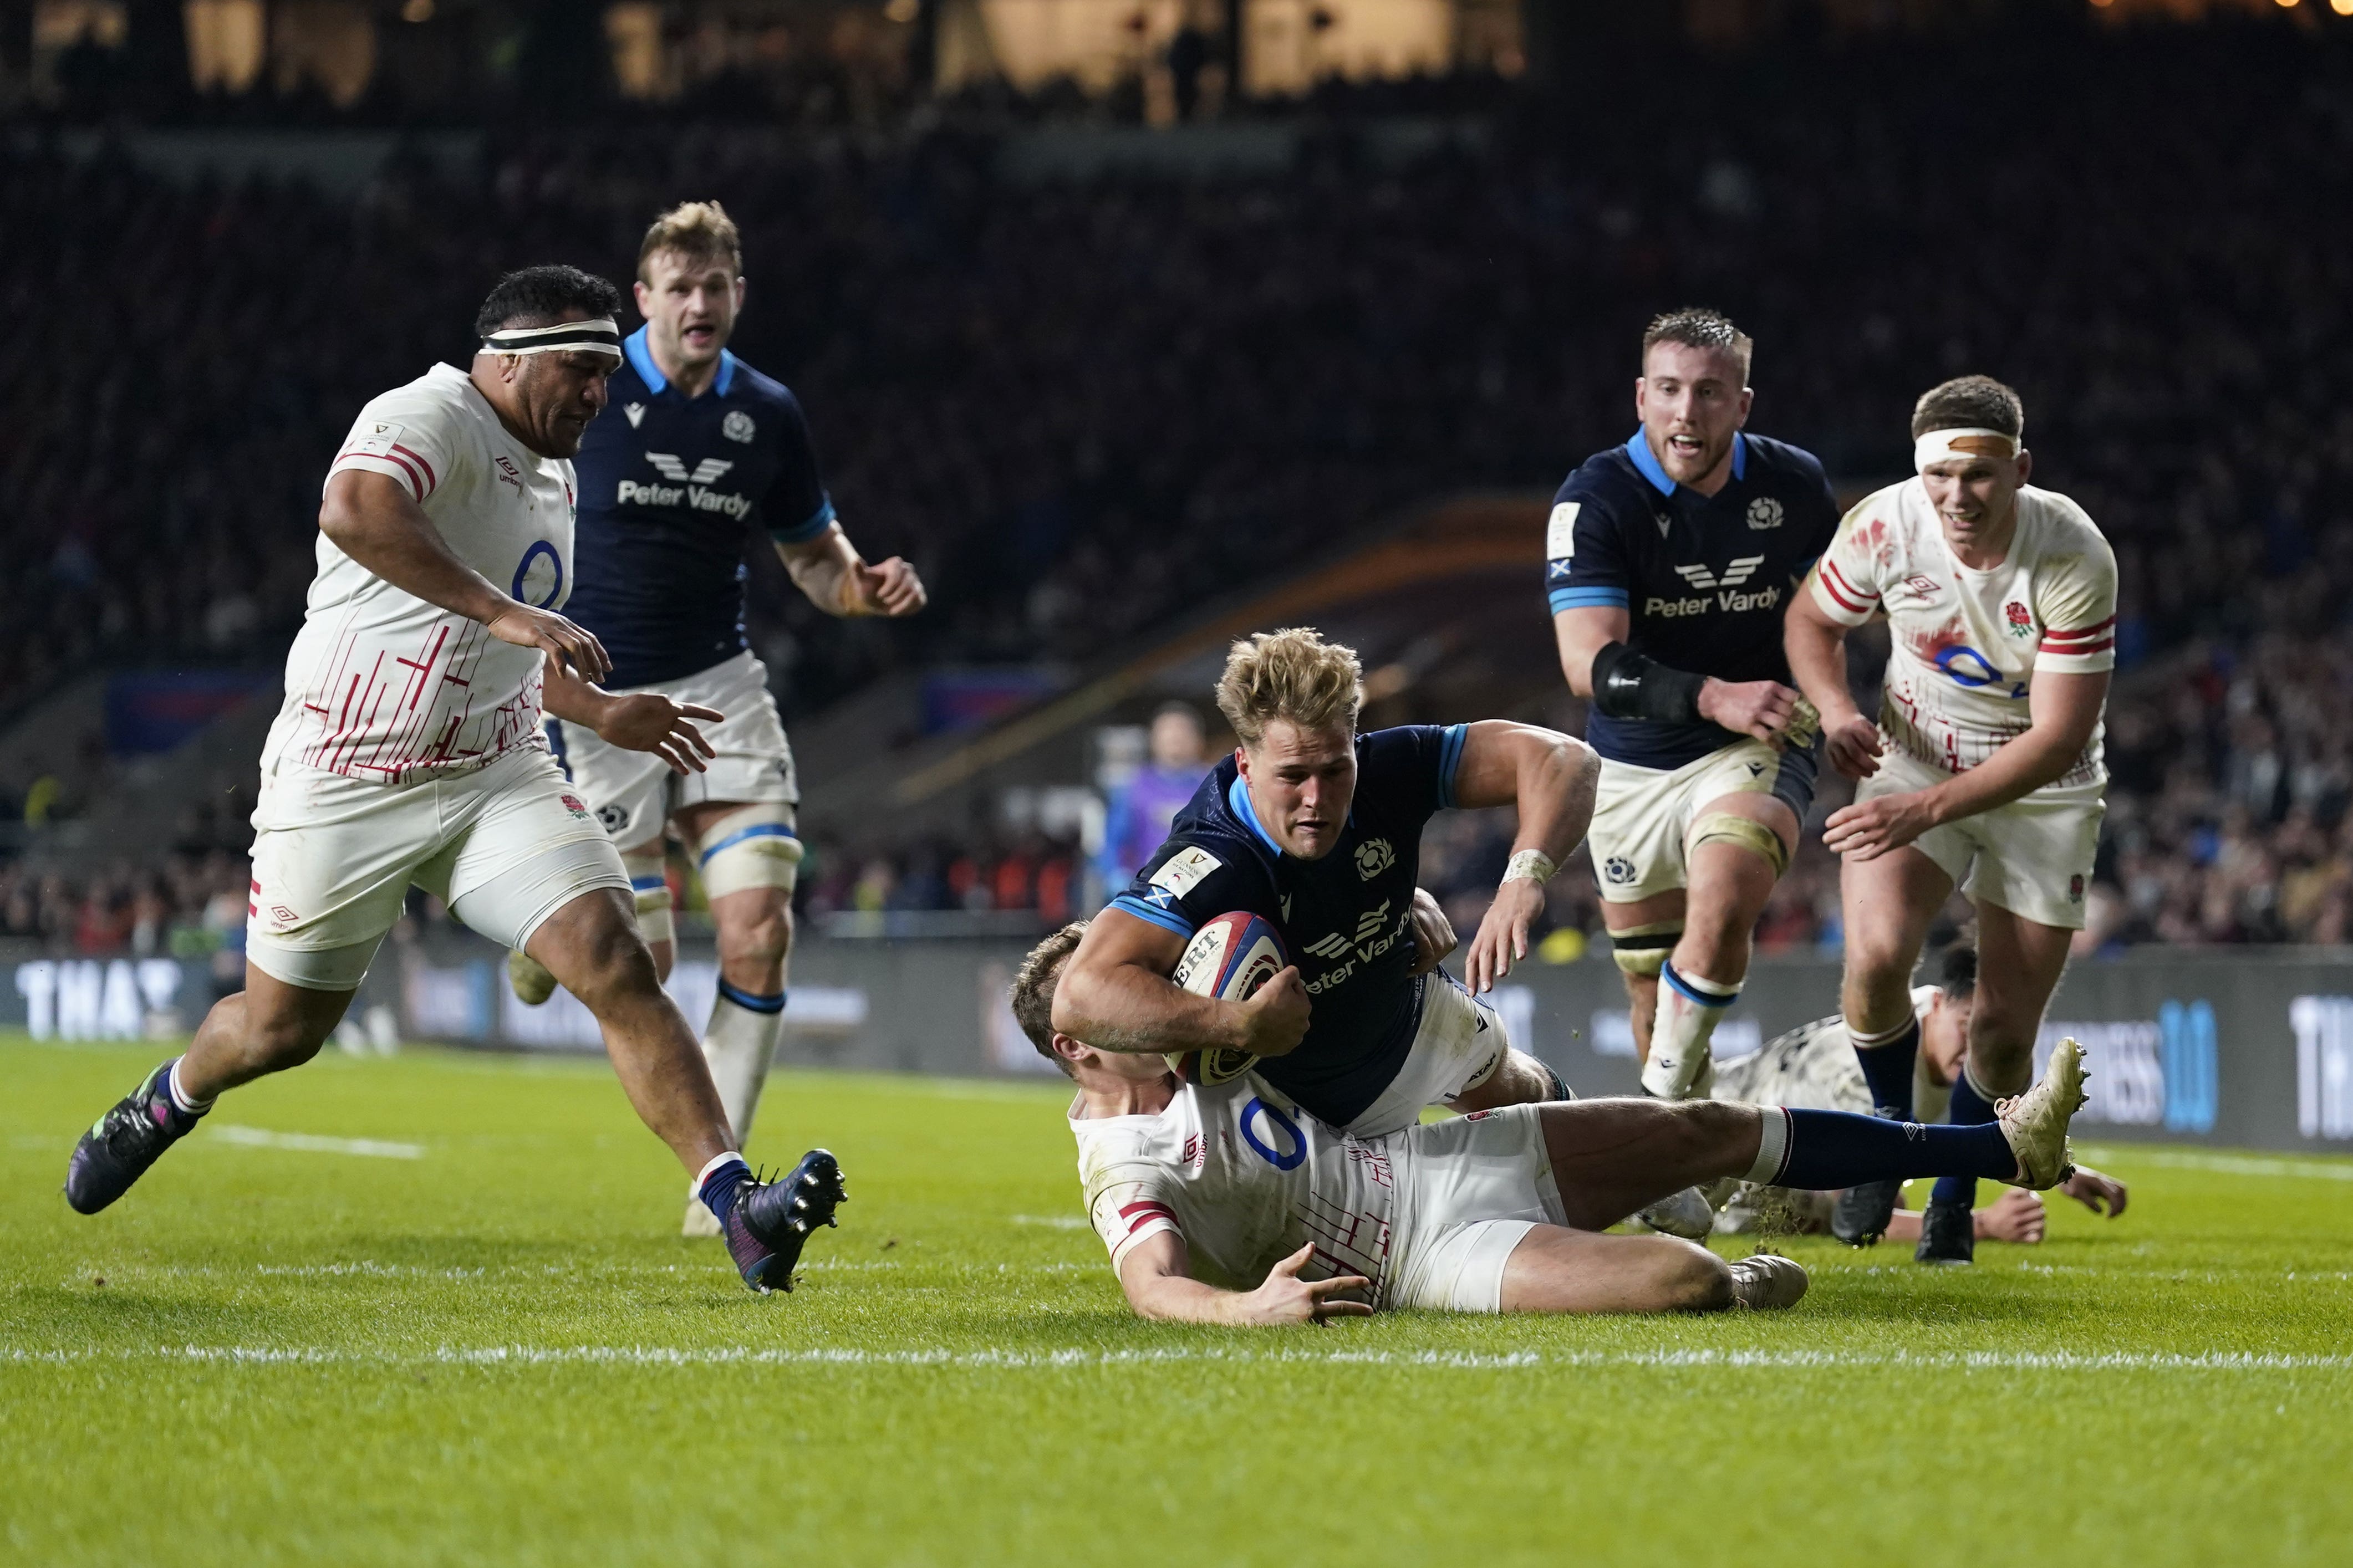 Duhan van der Merwe’蝉 second try of the match proved decisive for Scotland